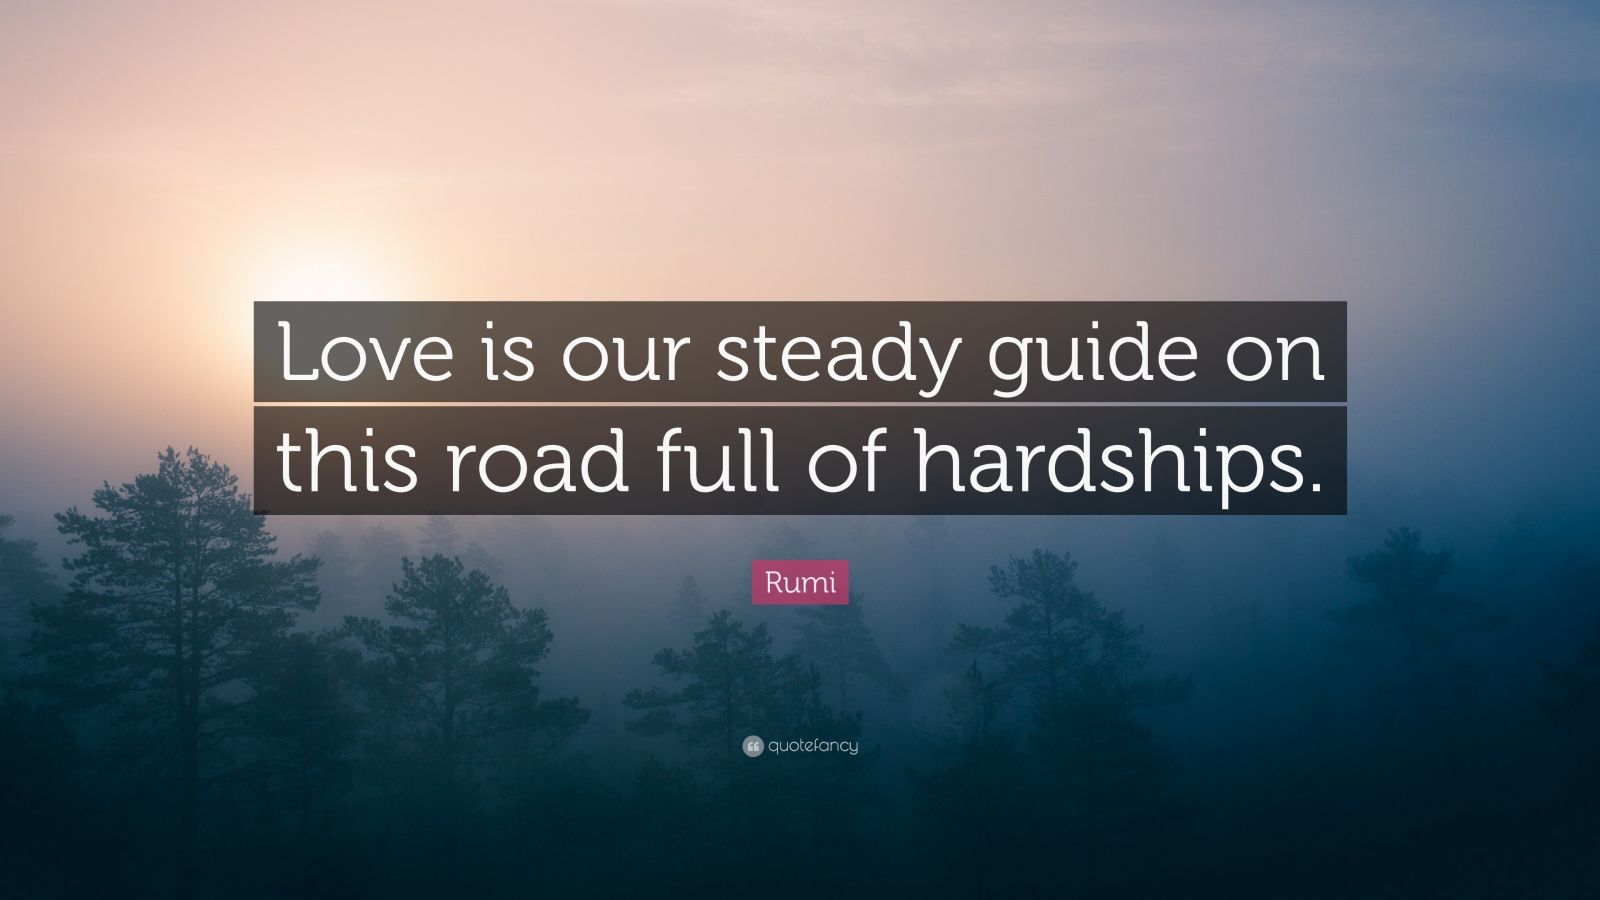 Rumi Quote: "Love is our steady guide on this road full of hardships." (10 wallpapers) - Quotefancy